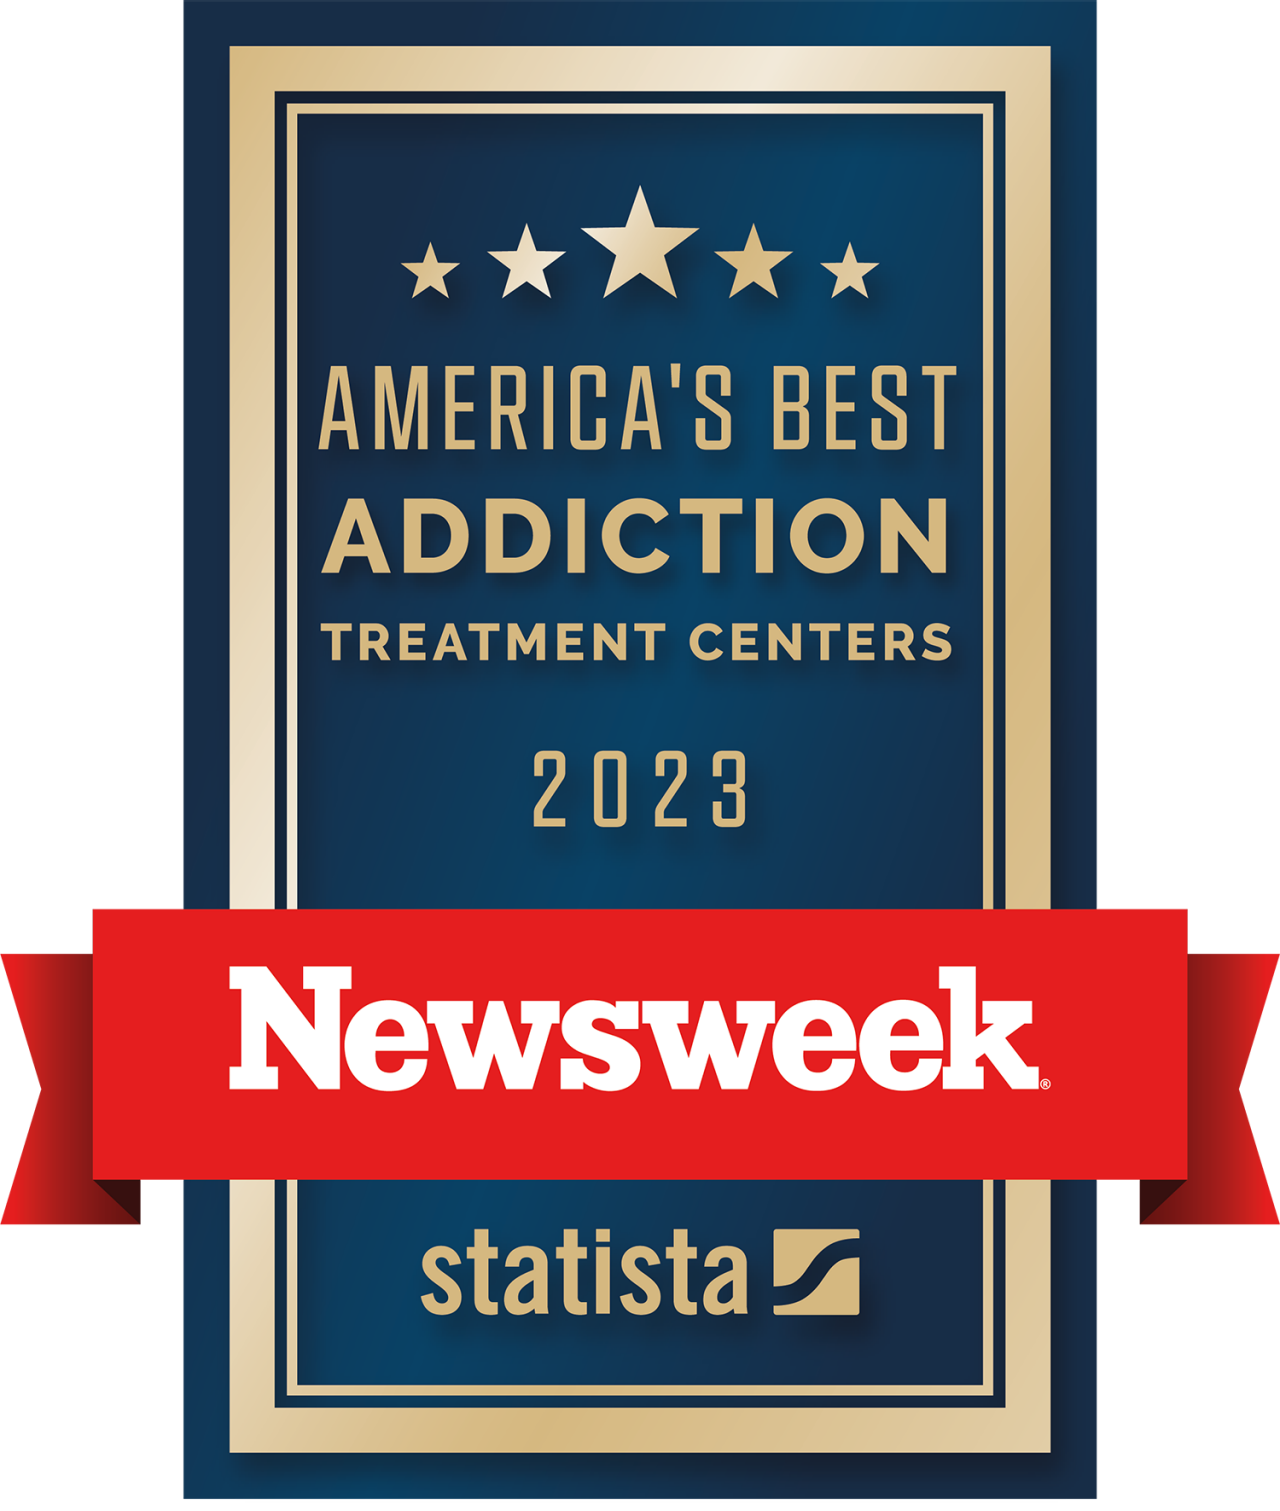 America's best addiction treatment centers in 2023 based on Newsweek and Statista